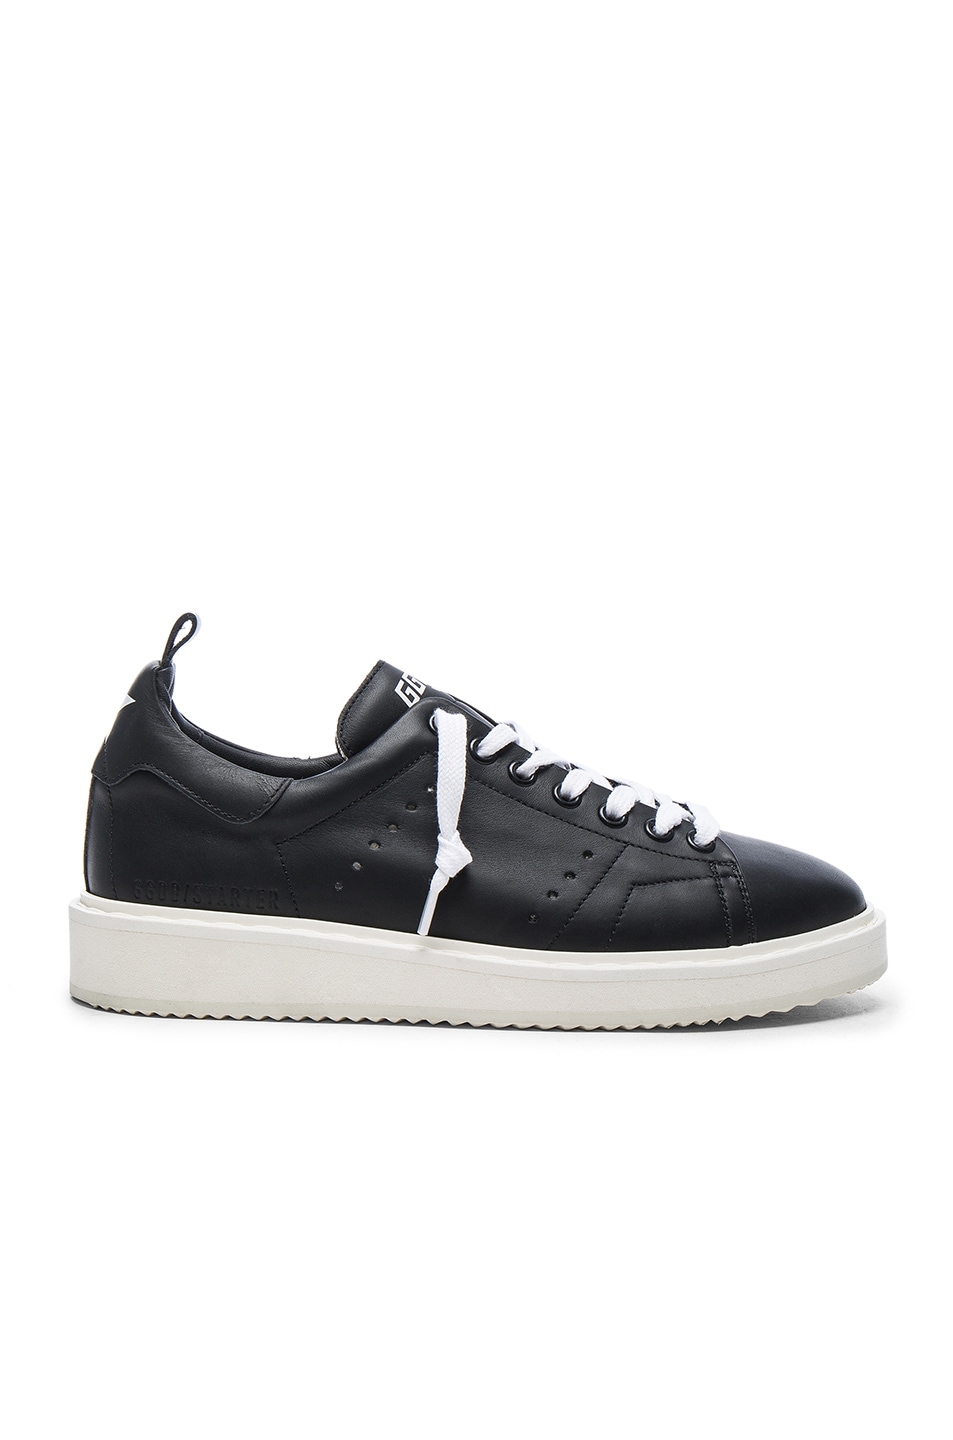 Image 1 of Golden Goose Leather Starter Sneakers in Black & White